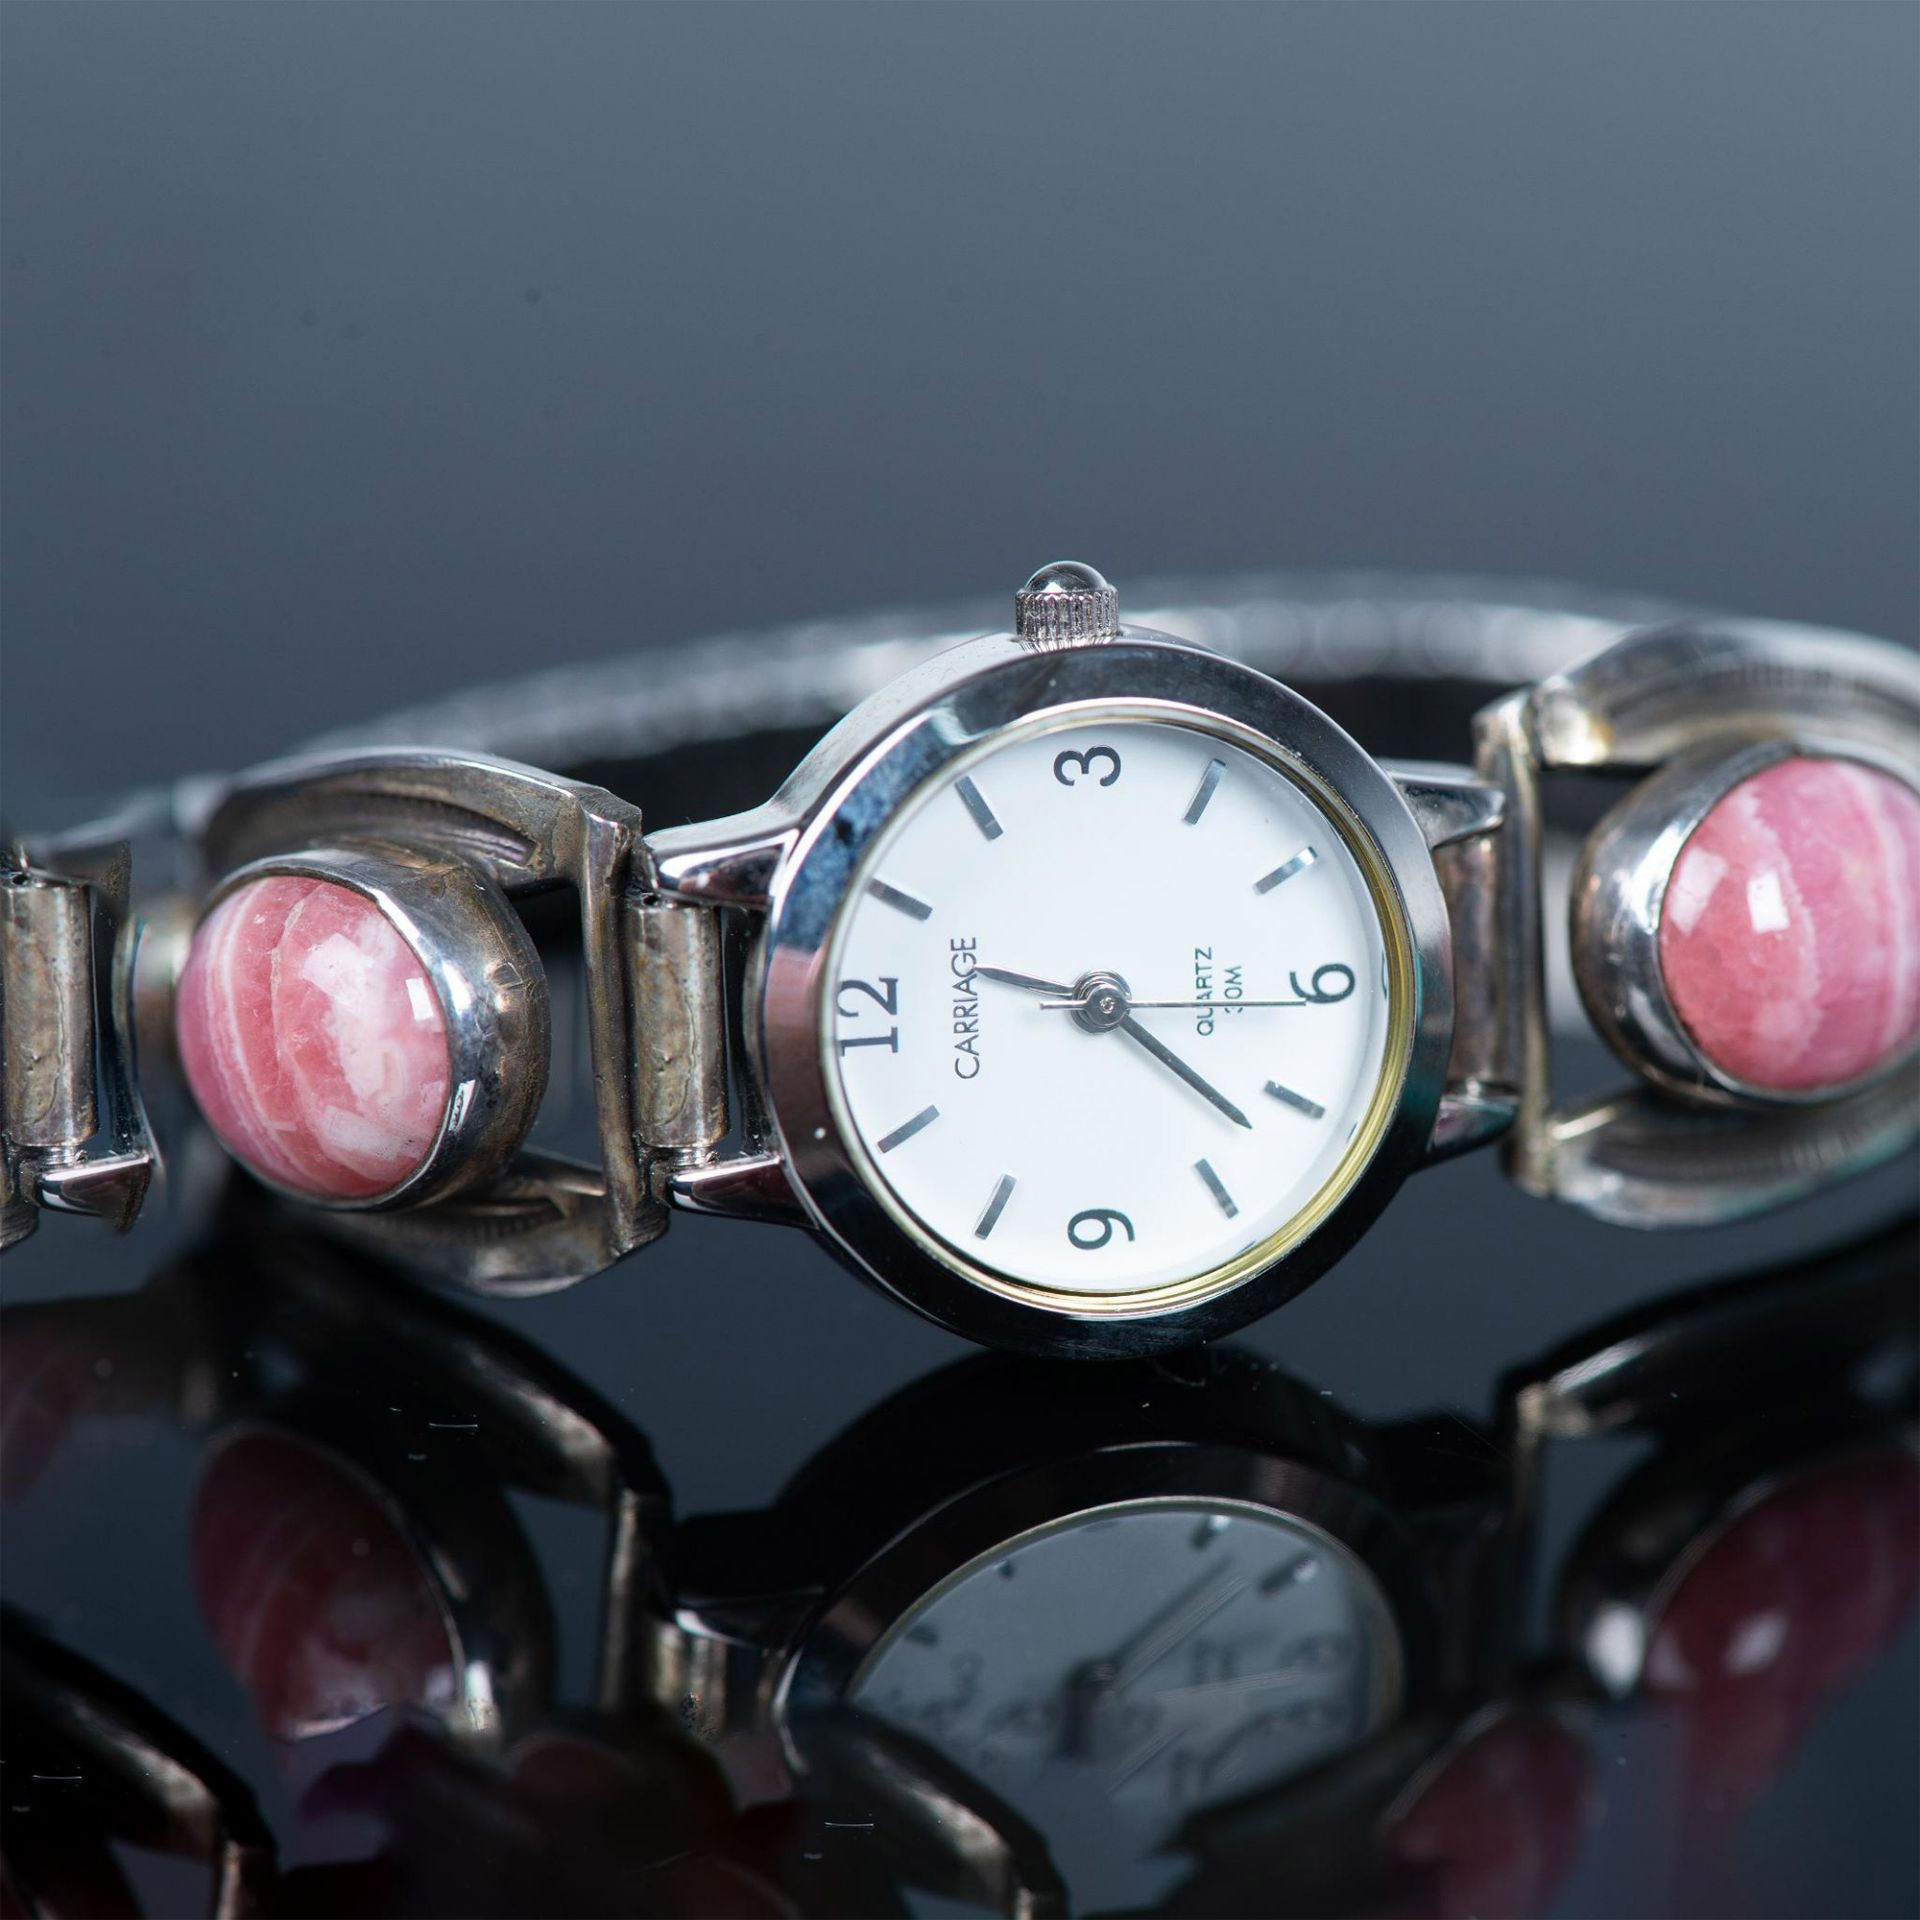 2pc Sterling Silver and Stone Watches - Image 6 of 7